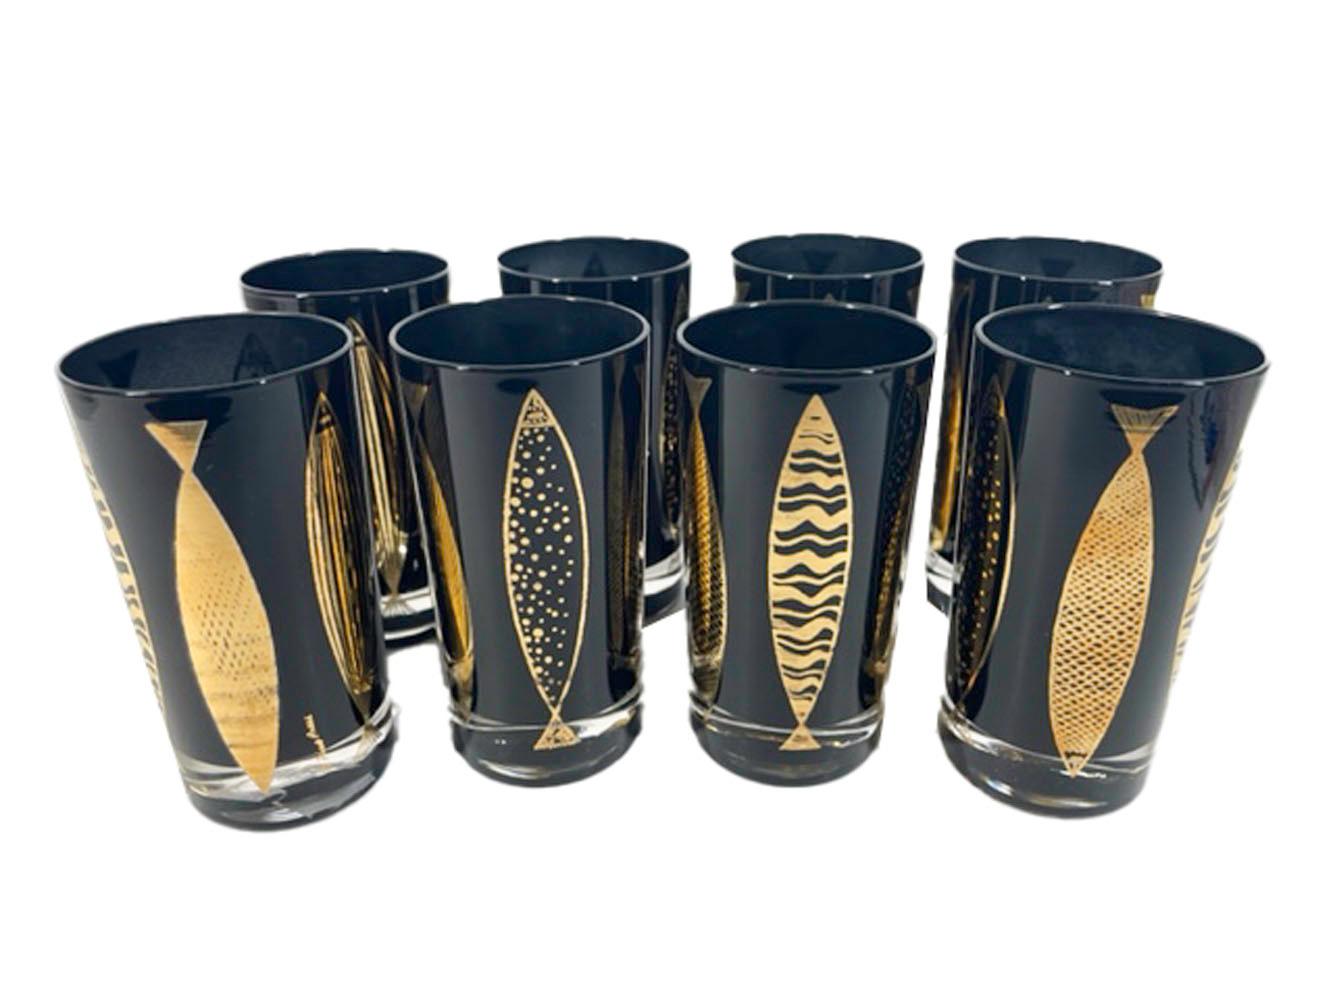 Set of 8 Fred Press highball glasses of clear glass with black frosted interiors and 22 karat gold stylized vertical fish in the atomic style on the exterior.